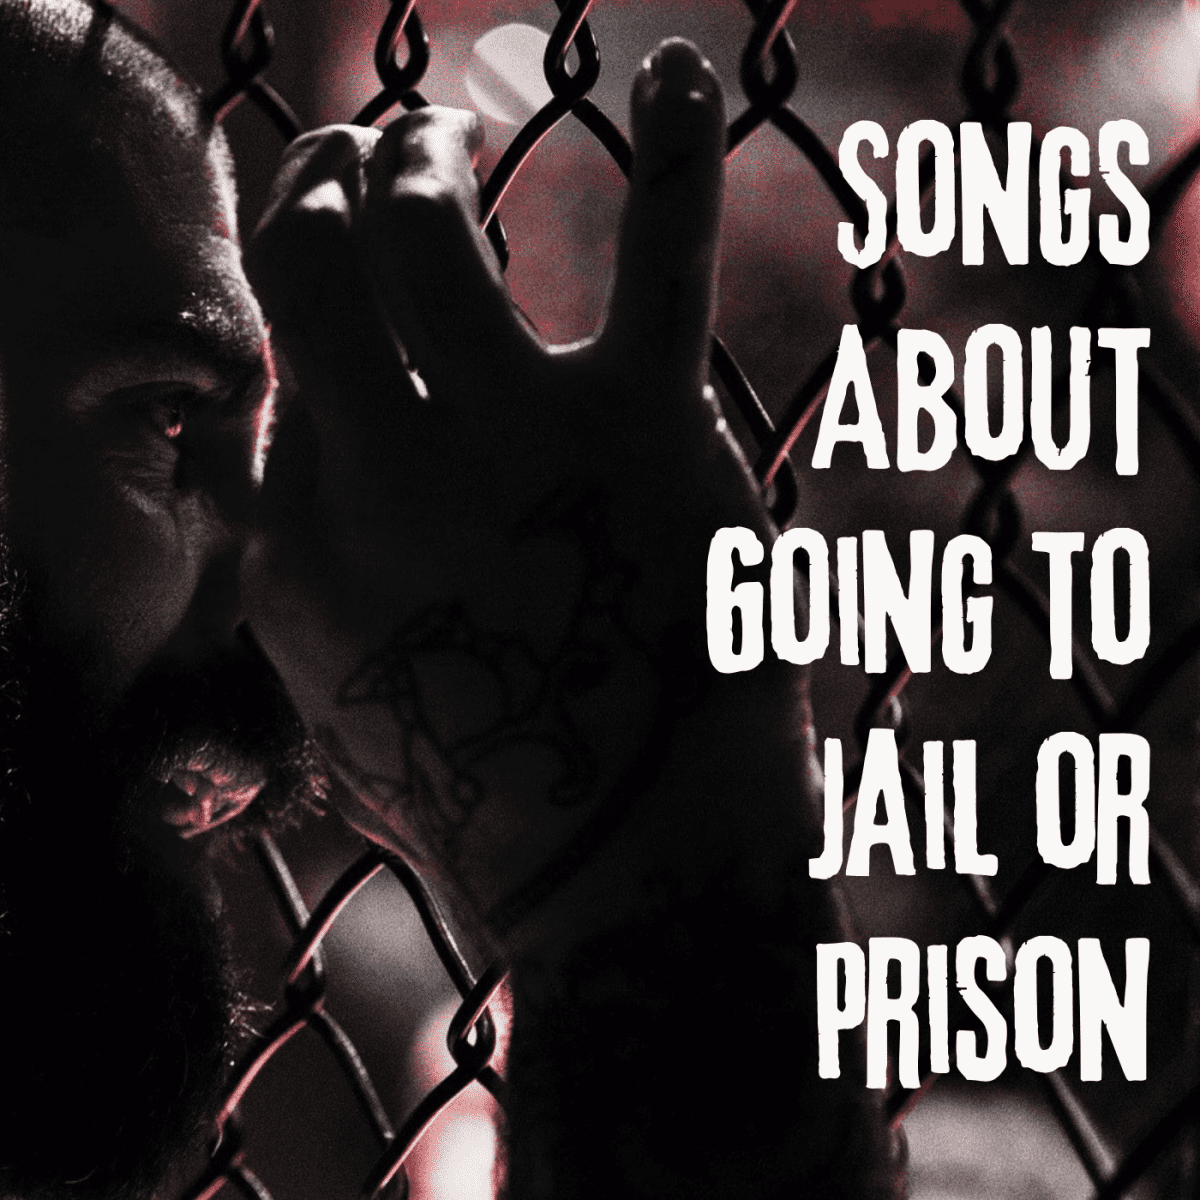 39 Songs About Going to Jail or Prison - Spinditty